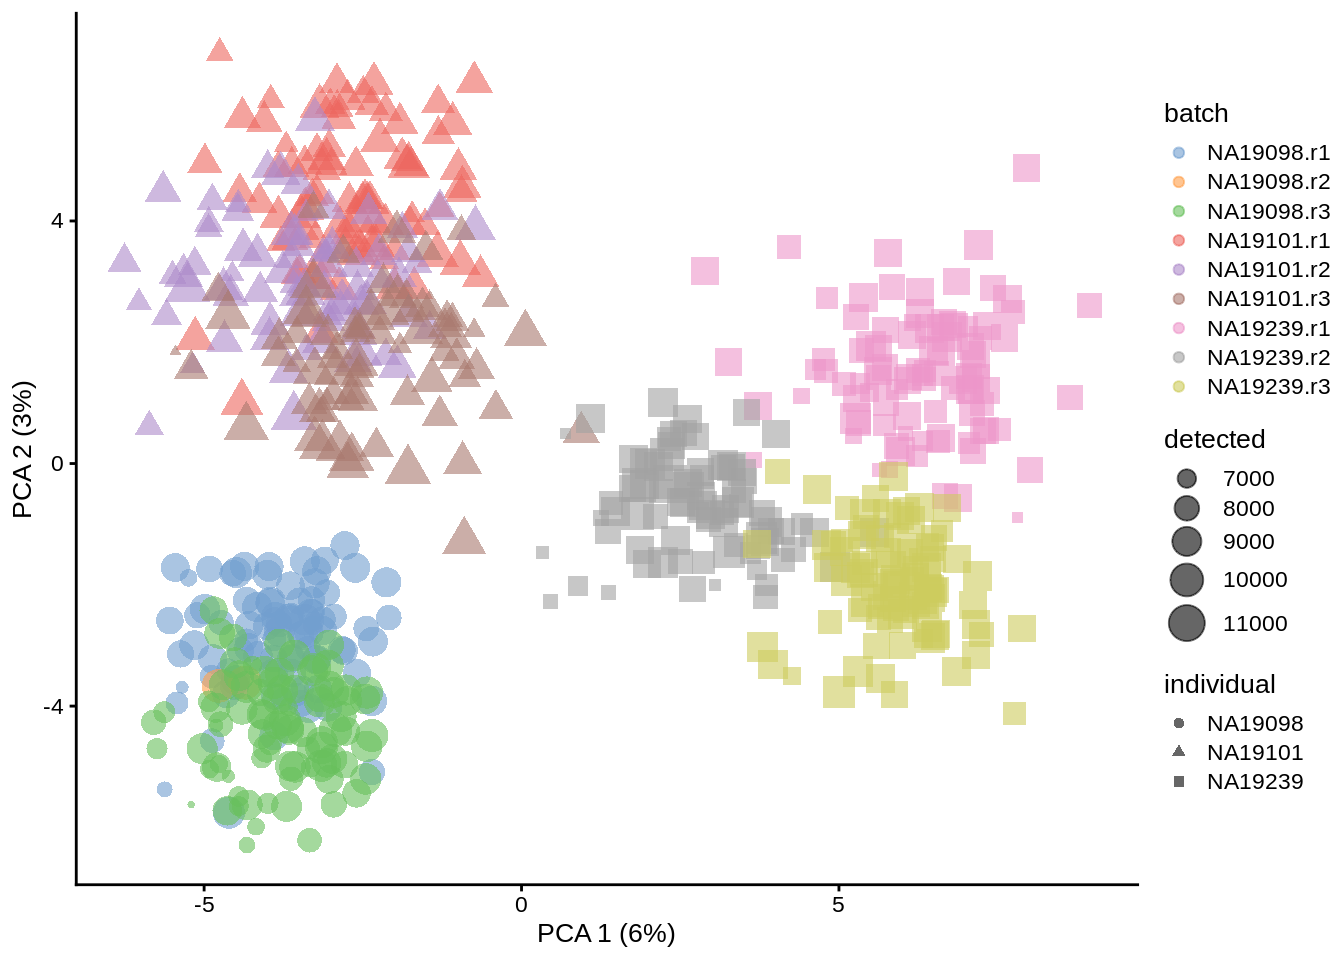 PCA plot of the tung data after downsampling